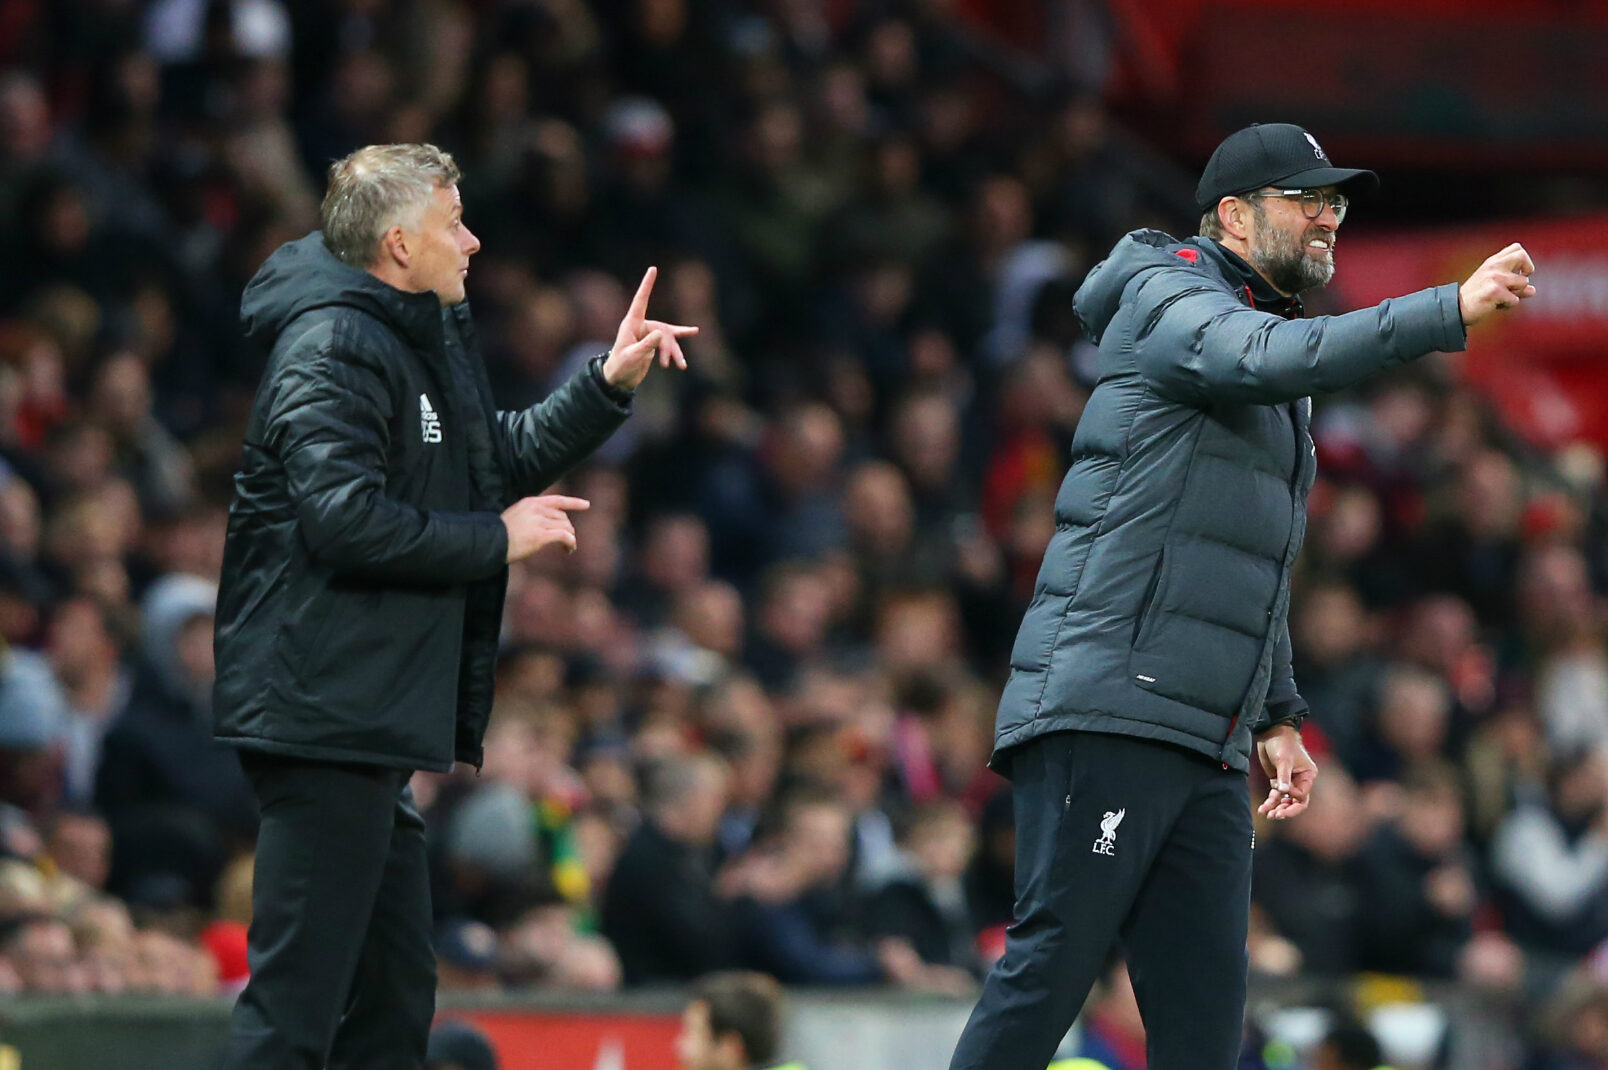 FA Cup draw: Manchester United sets up dual meeting with Liverpool